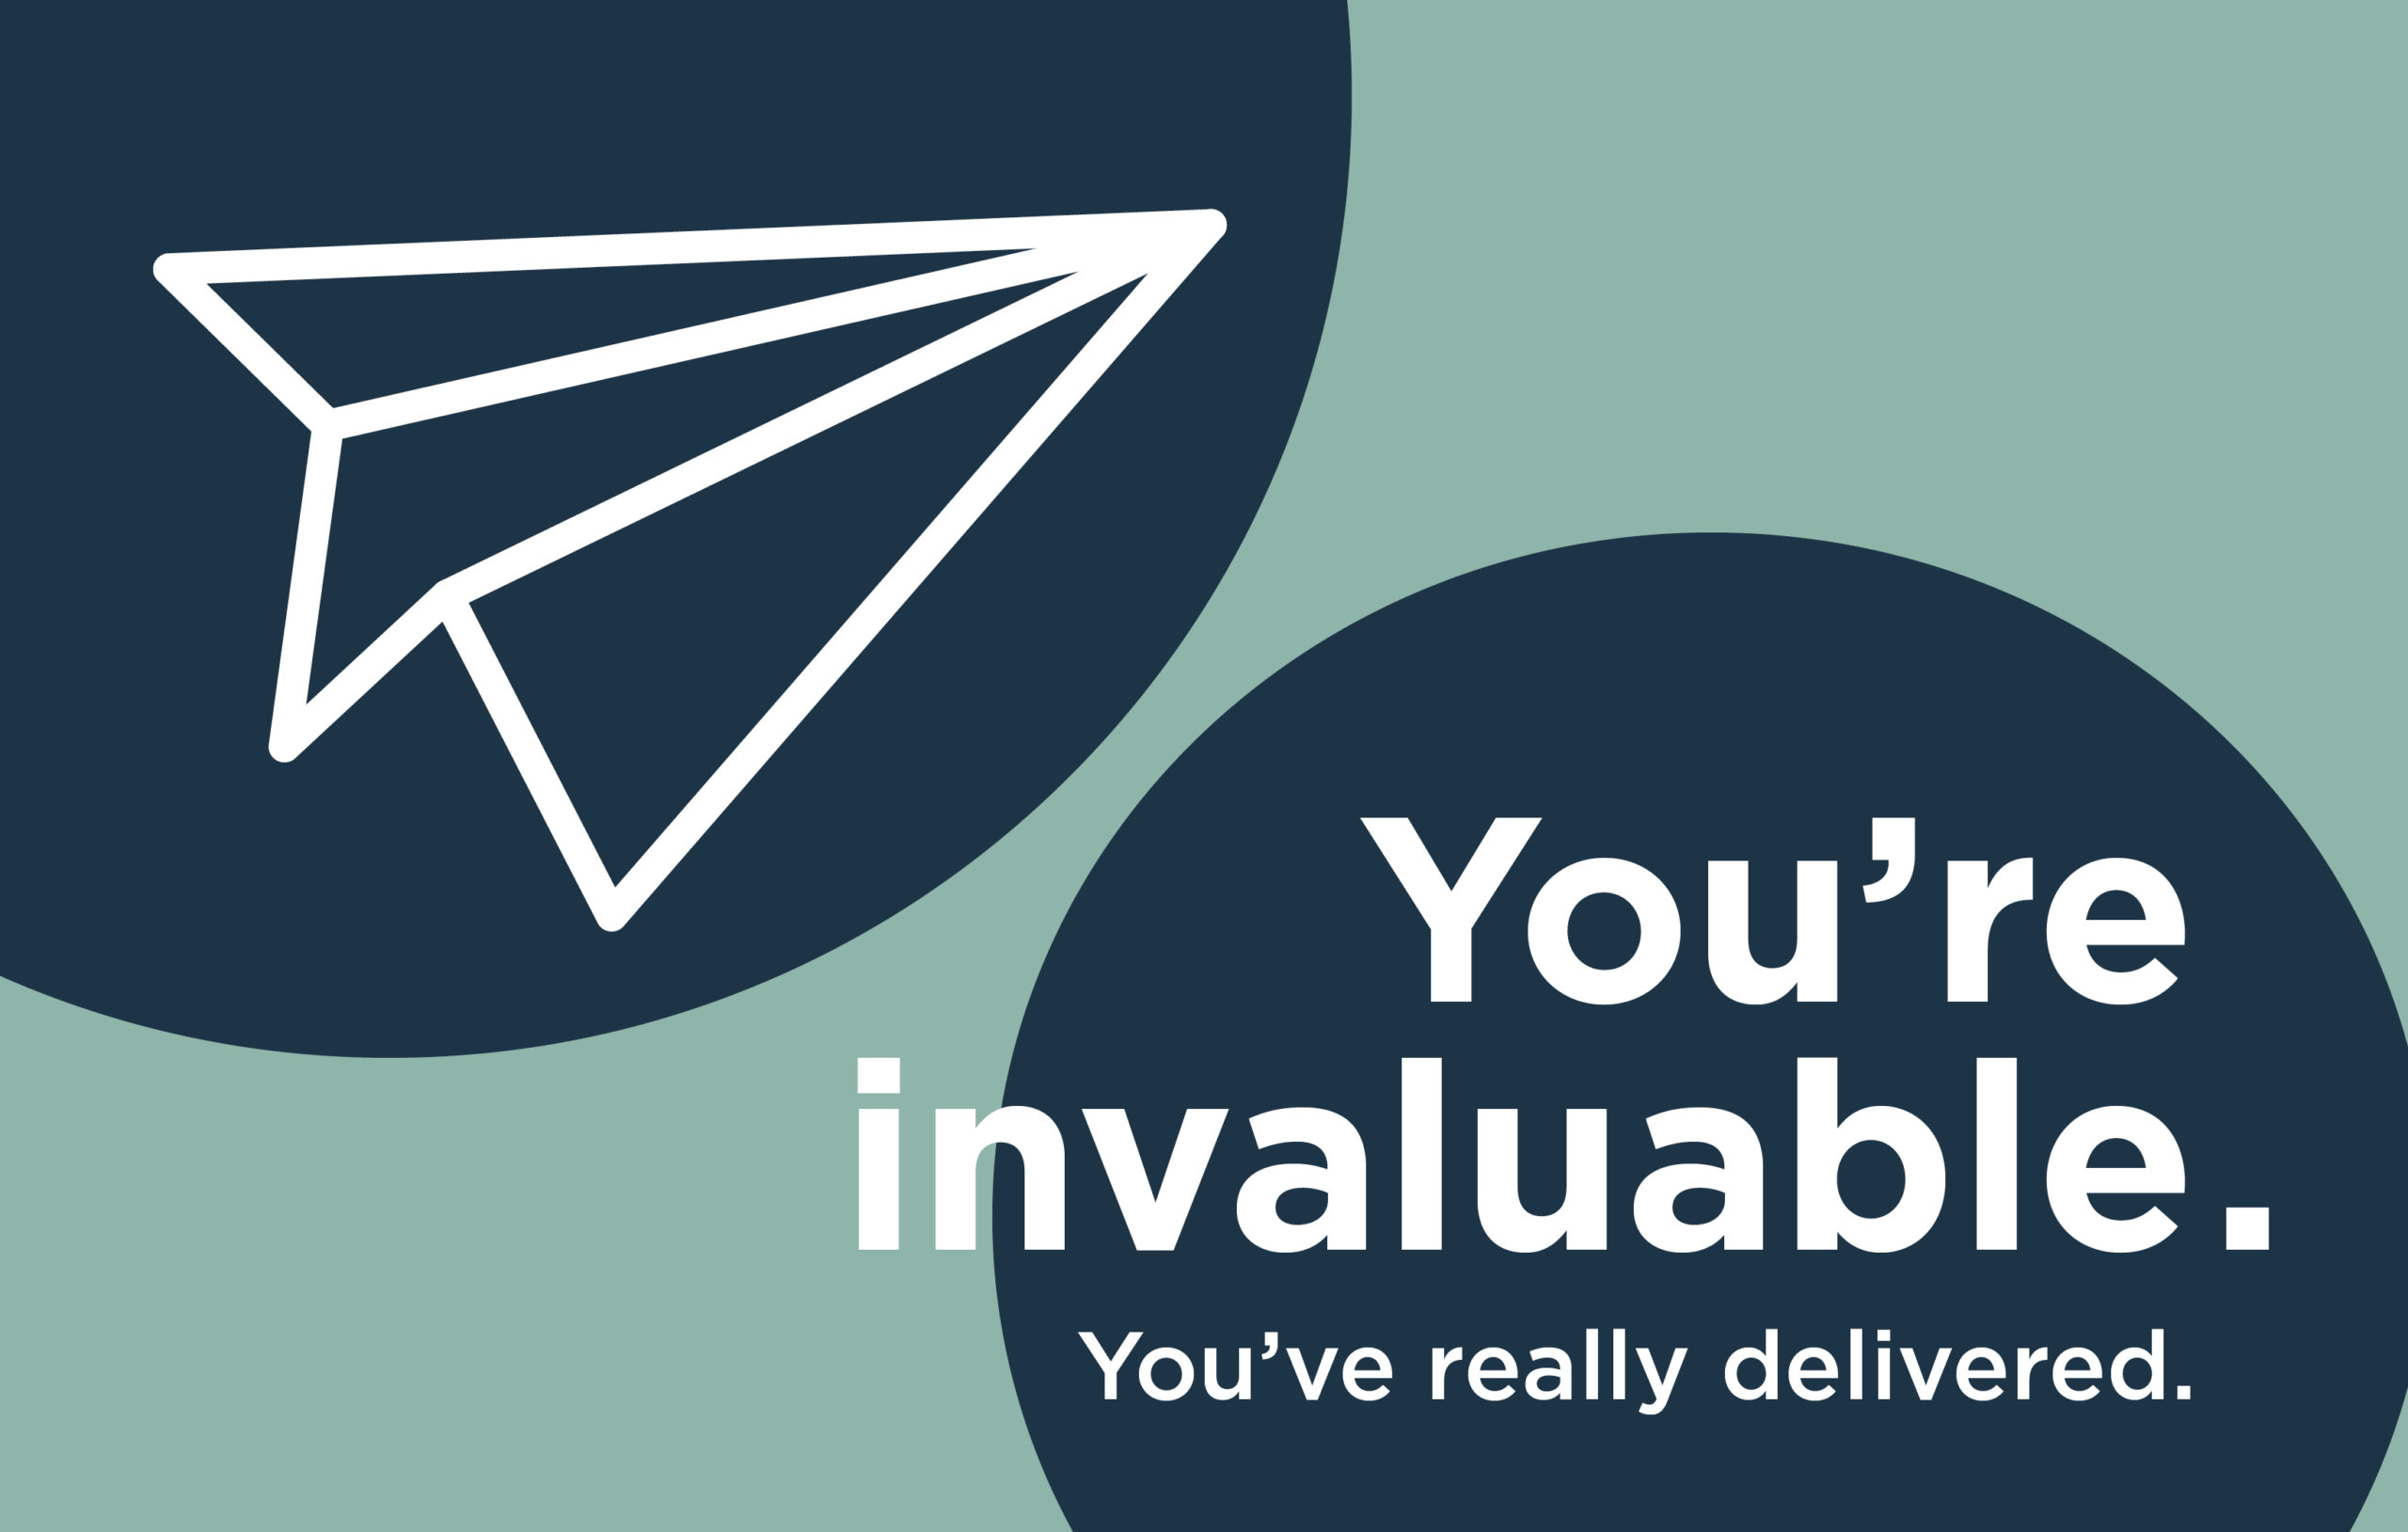 Image of e-card with copy 'You're invaluable'